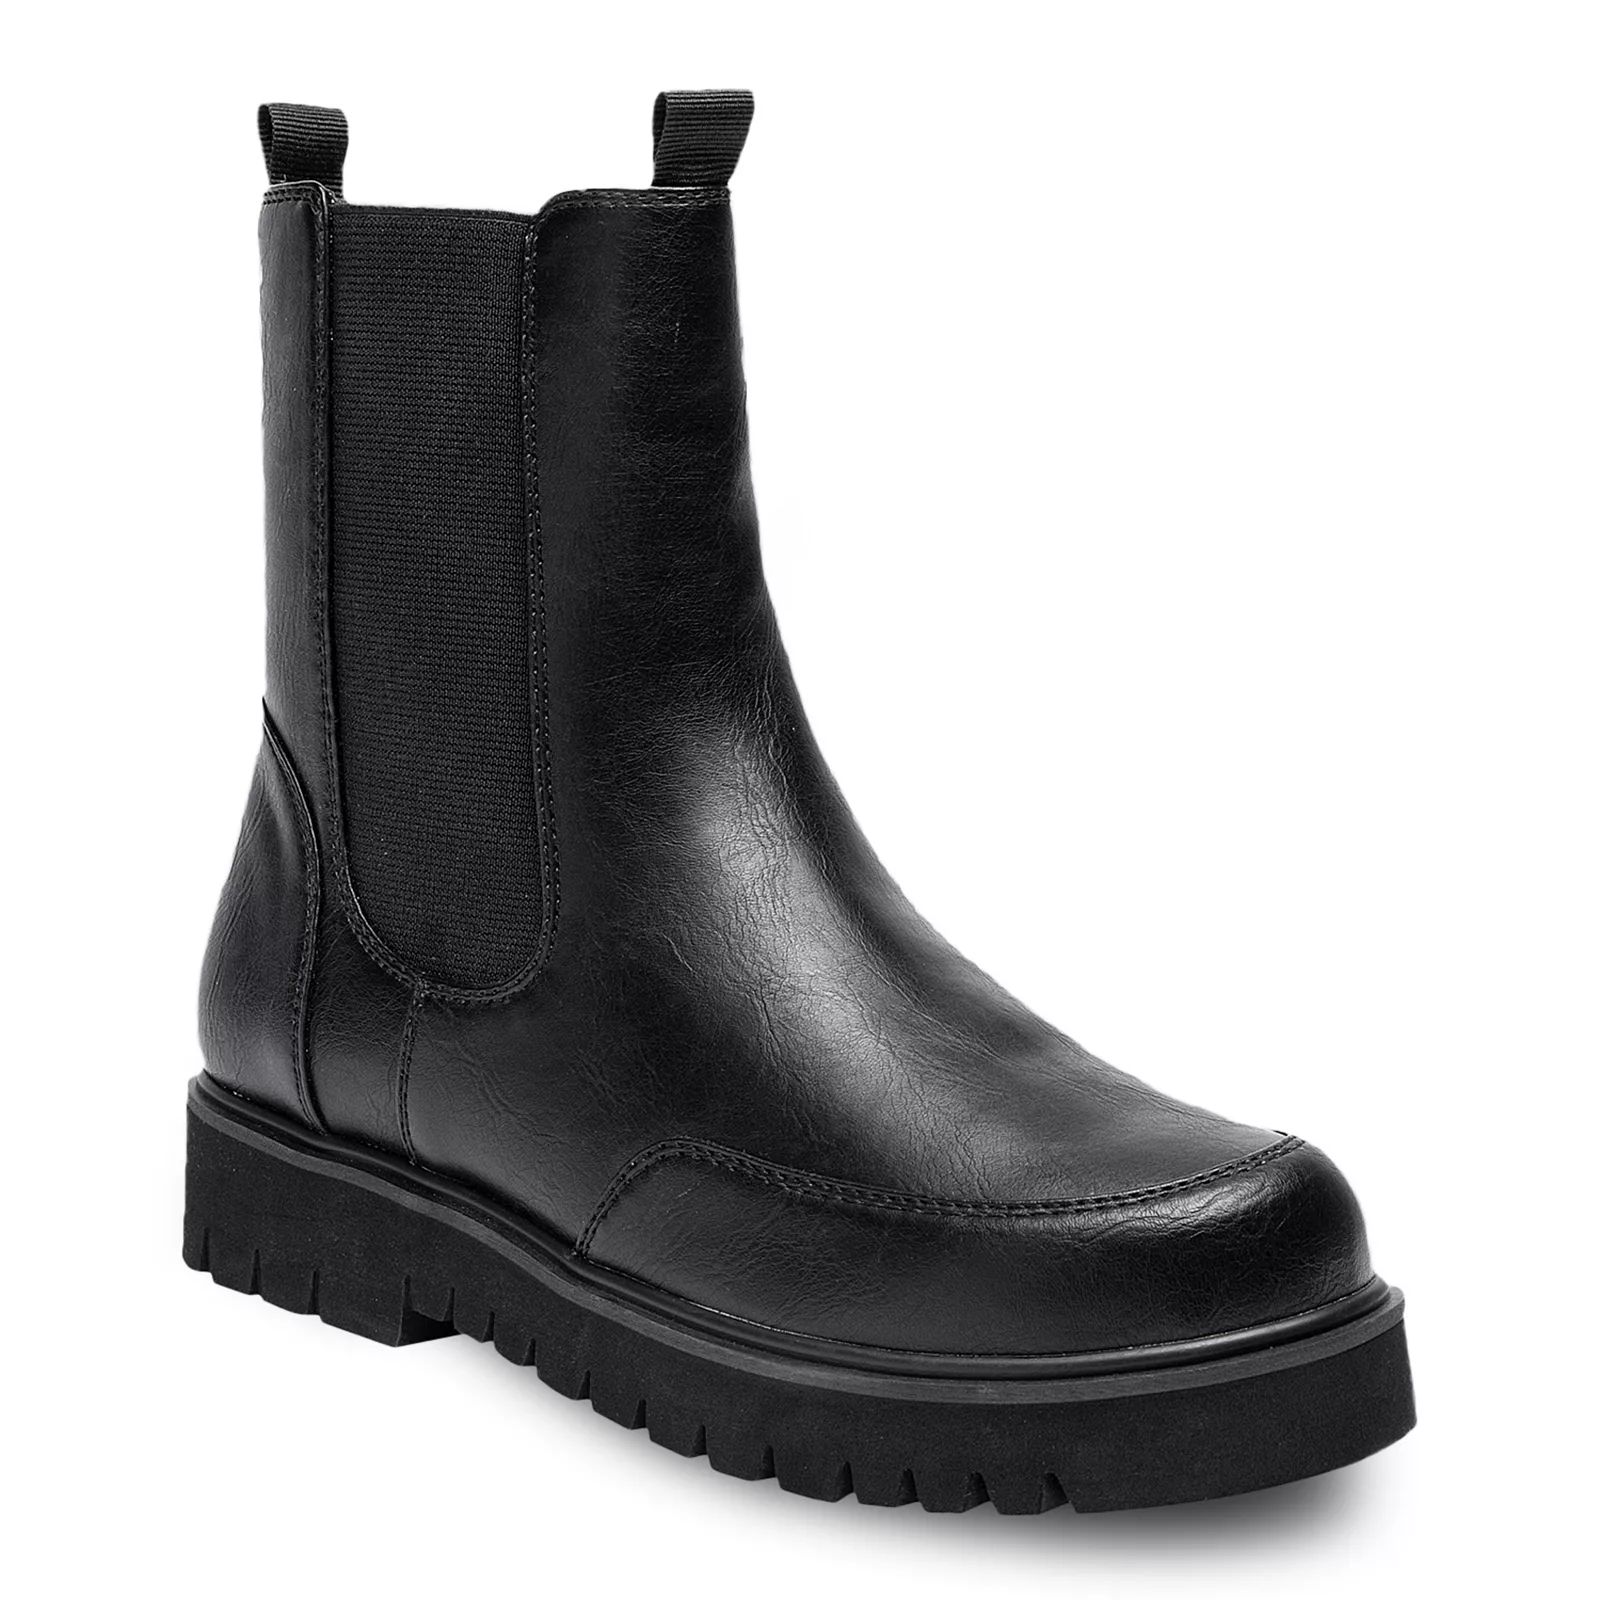 Jane and the Shoe Hayley Women's Chelsea Boots, Size: 7.5, Black | Kohl's